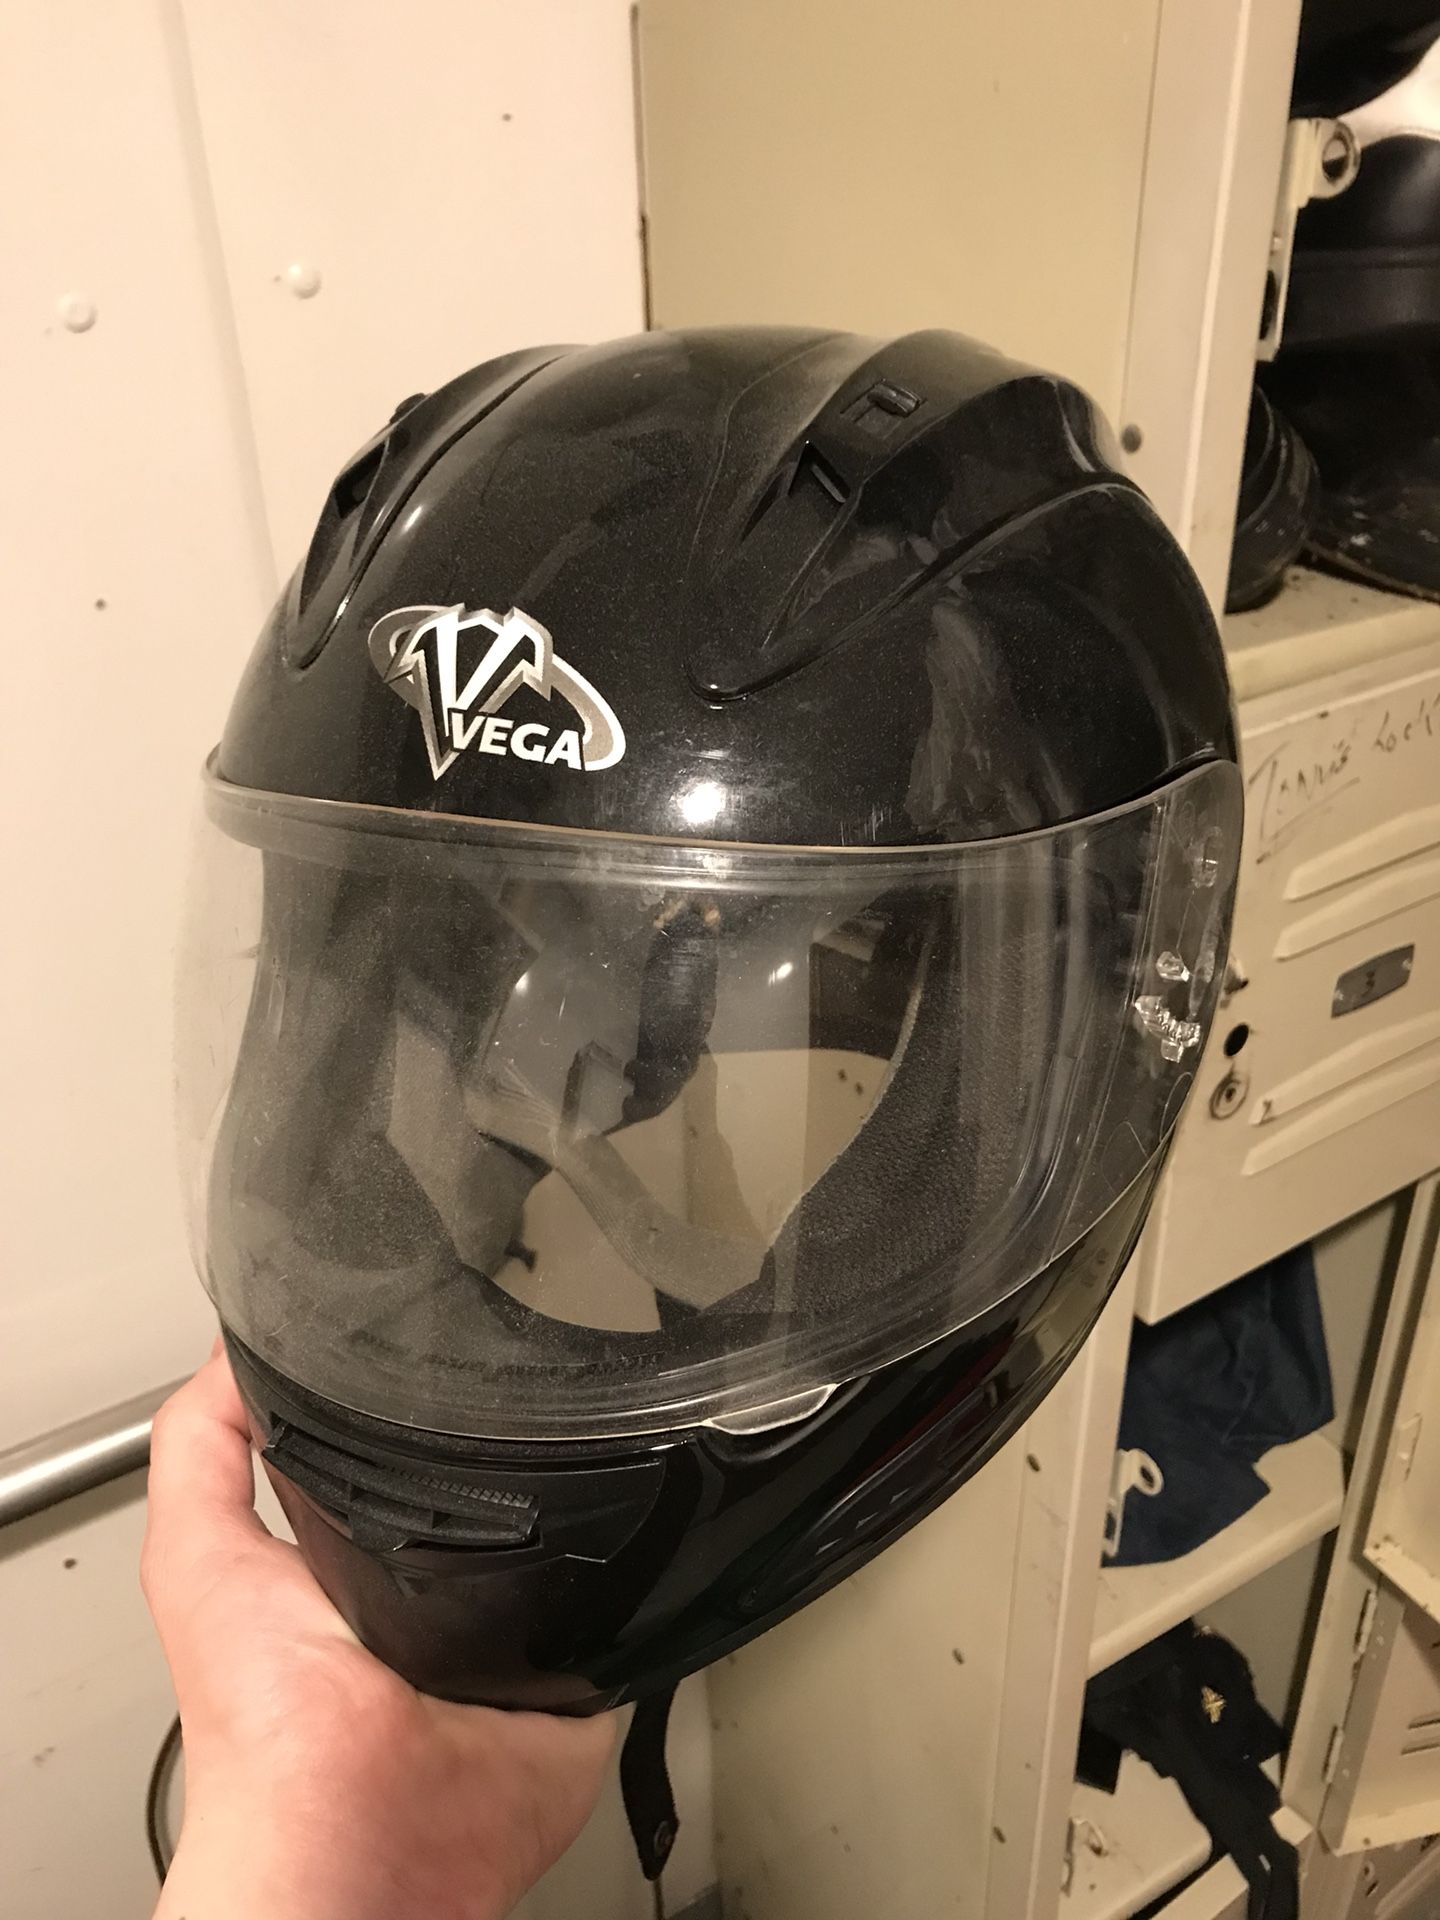 Motorcycle helmet in good condition, no crashes